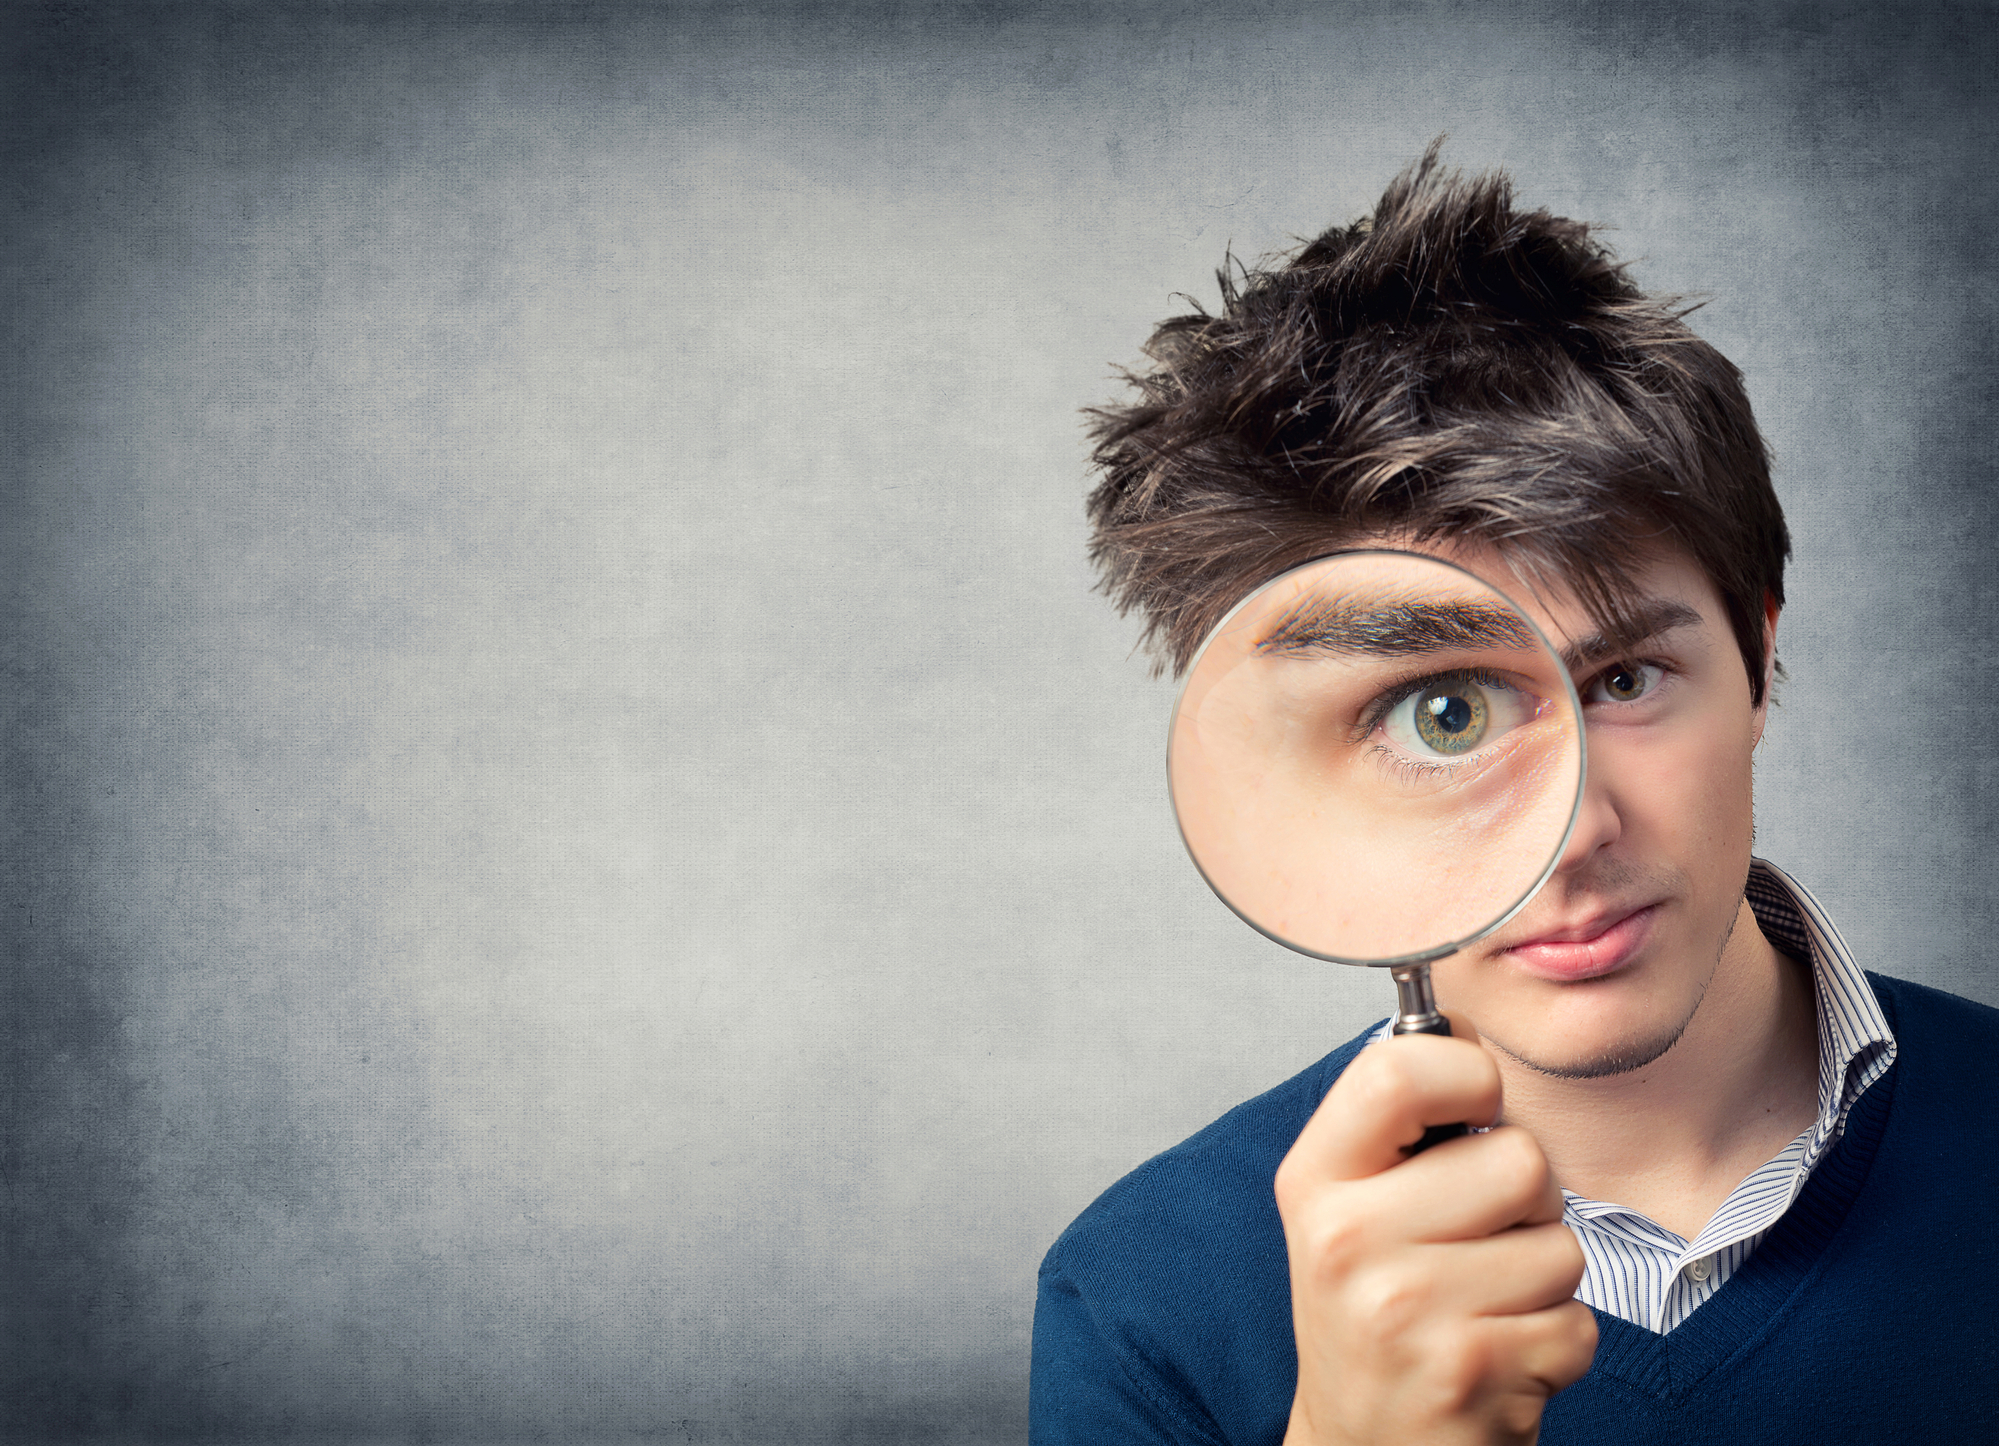 A man holding a magnifying glass in front of his face